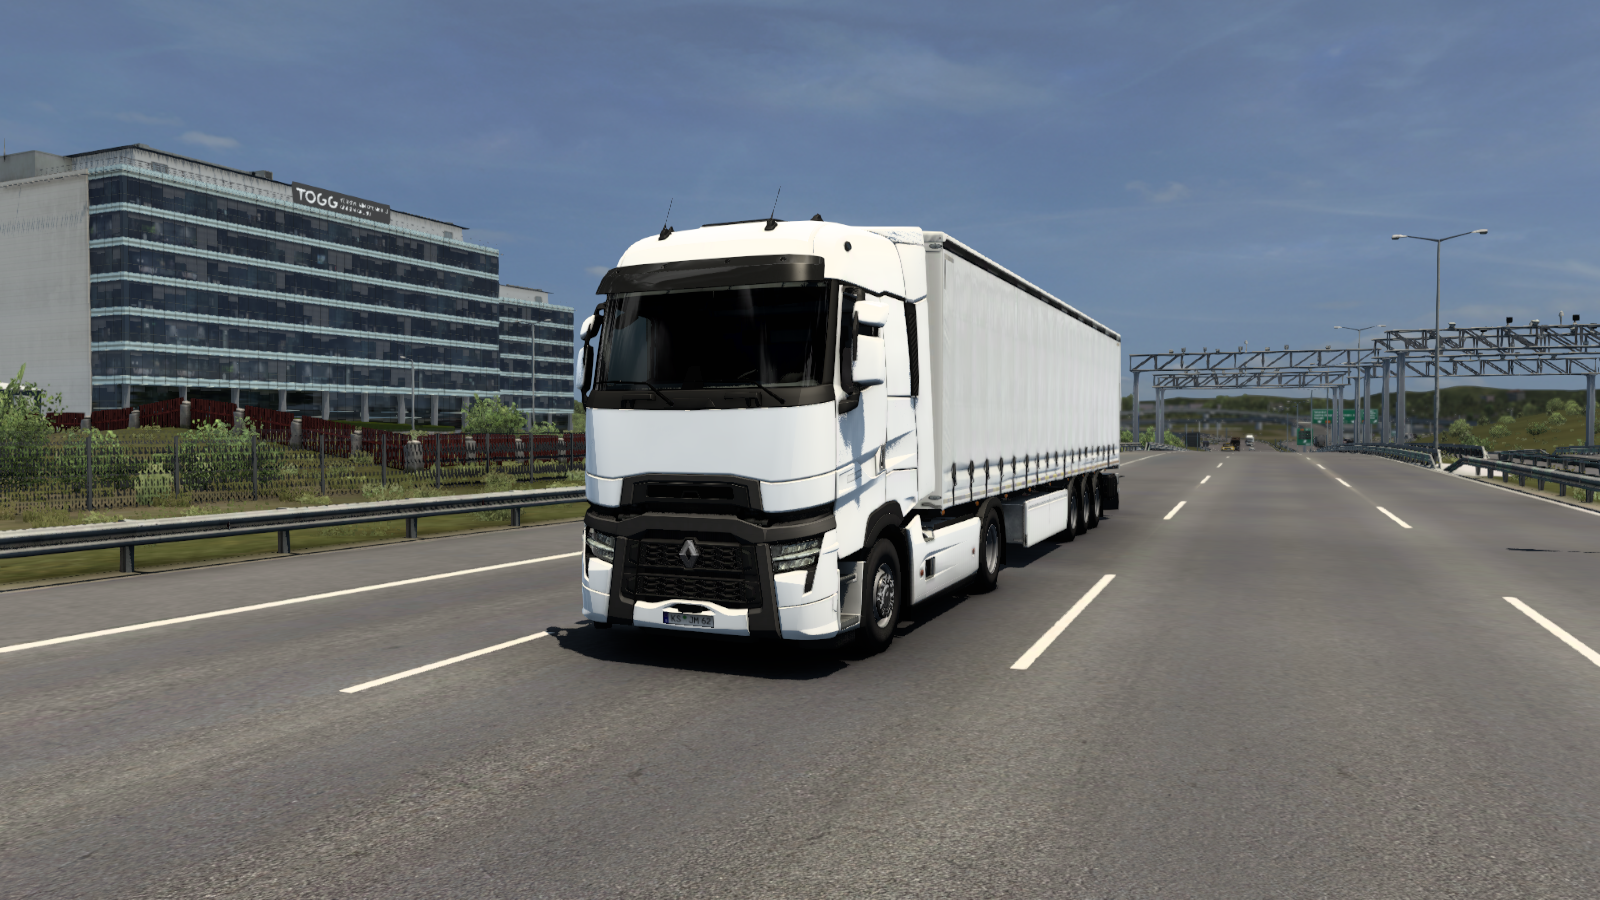 ets2_20210408_132327_00.png